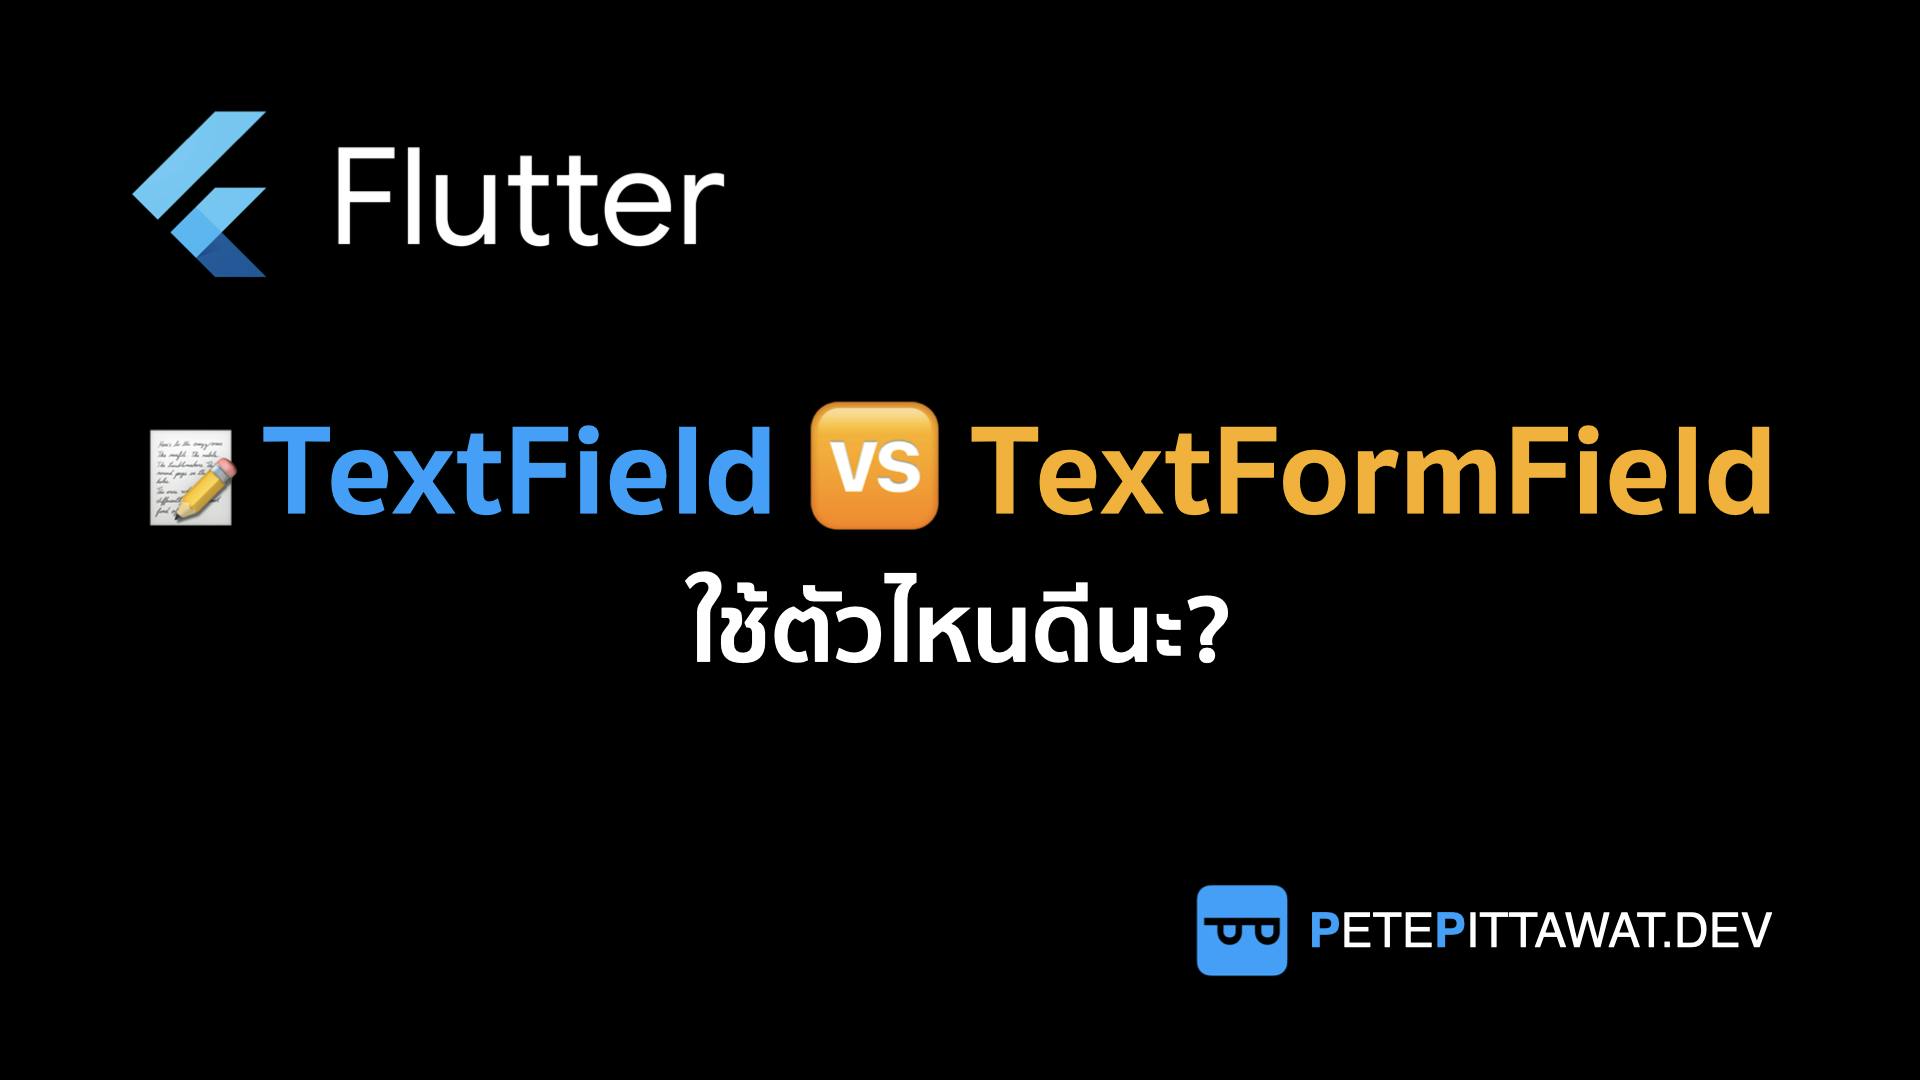 Cover Image for Flutter: TextField vs TextFormField ใช้ตัวไหนดีนะ?